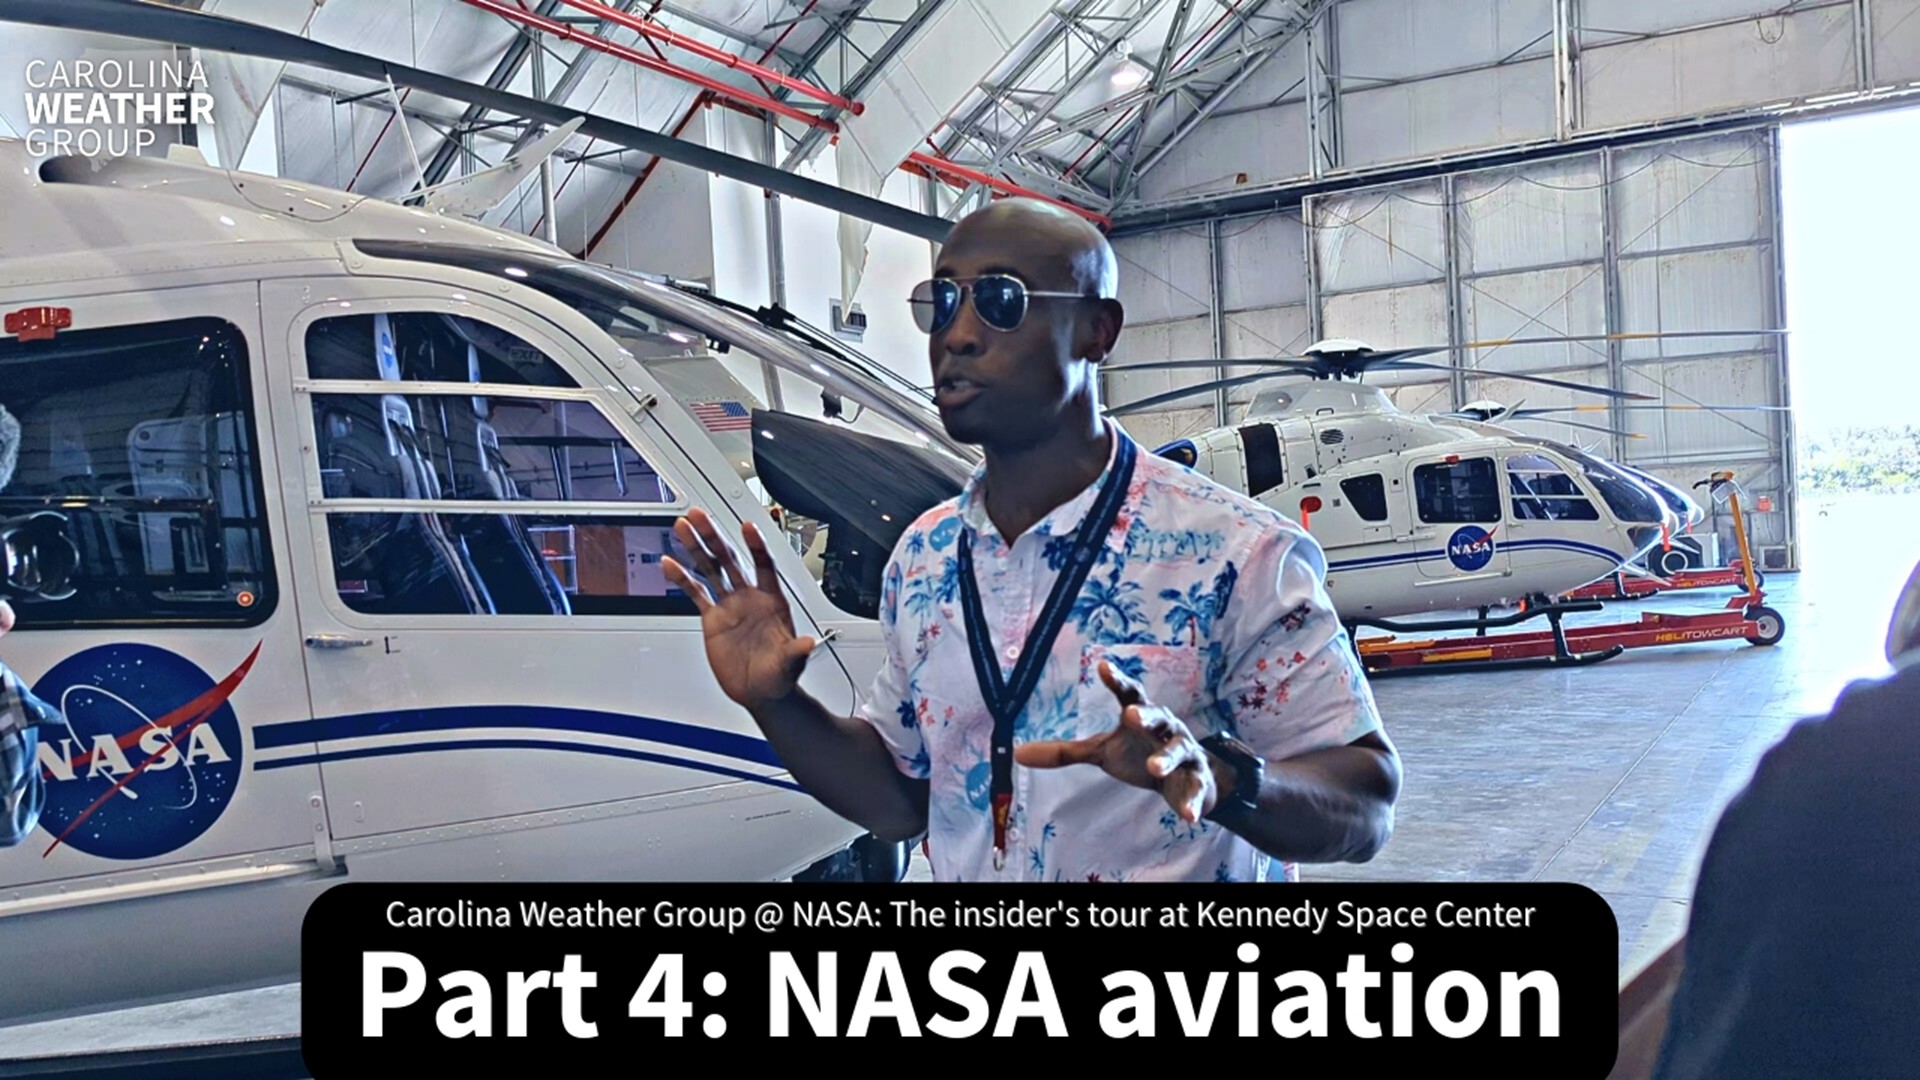 Aircraft Flight Operations at NASA's Kennedy Space Center provide mission security, observation, photography, and more.